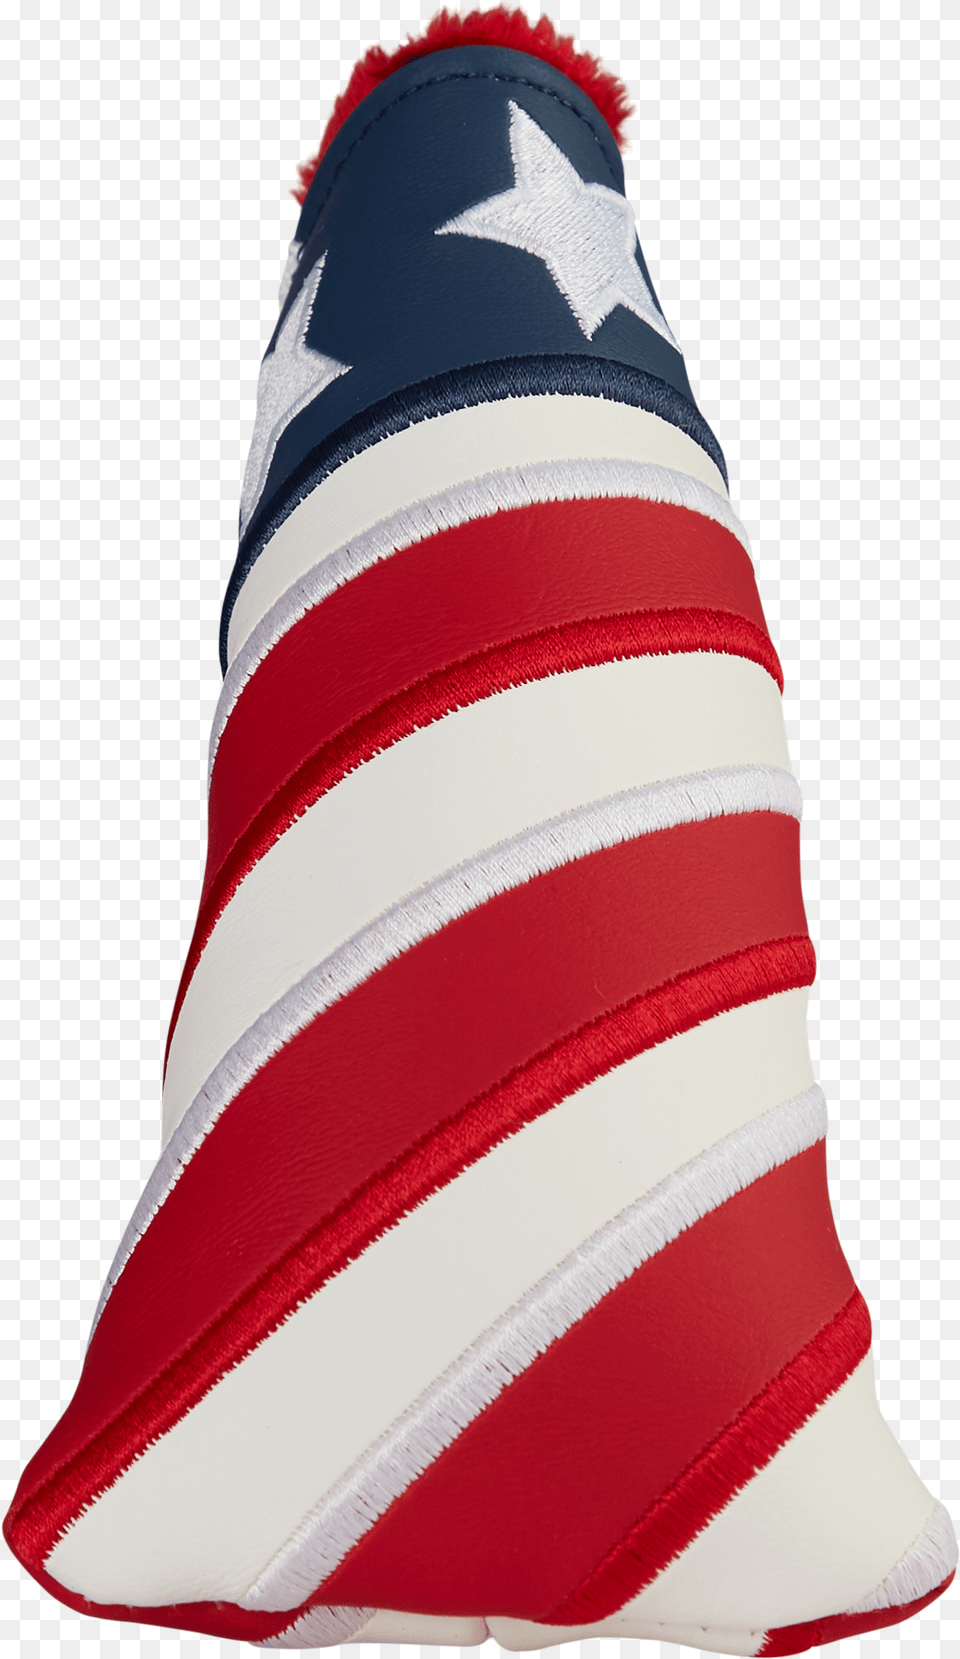 Download Stars Stripes Party Hat, Home Decor, Clothing, Cushion, Shoe Png